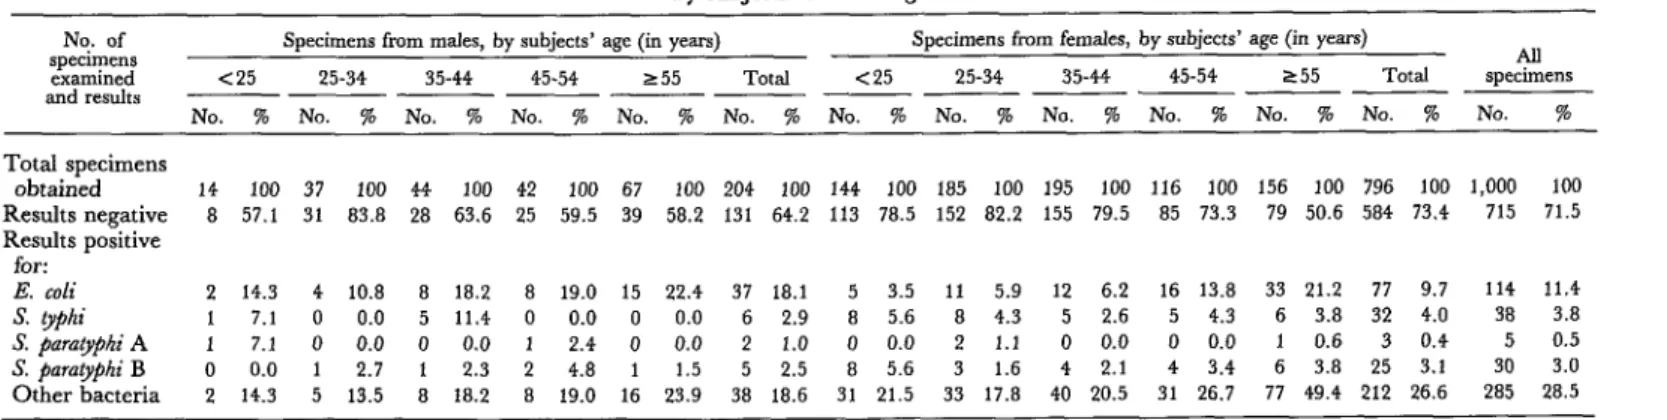 Table  5.  Isolates  of  E.  co&amp;  S.  Evphi, S. $~rat#i  A,  S.  $arat&amp;&amp;hi  B,  and  other  bacteria  obtained  from  the  1,000  bile  specimen  tested,  bv  subiects’  sex  and  aae